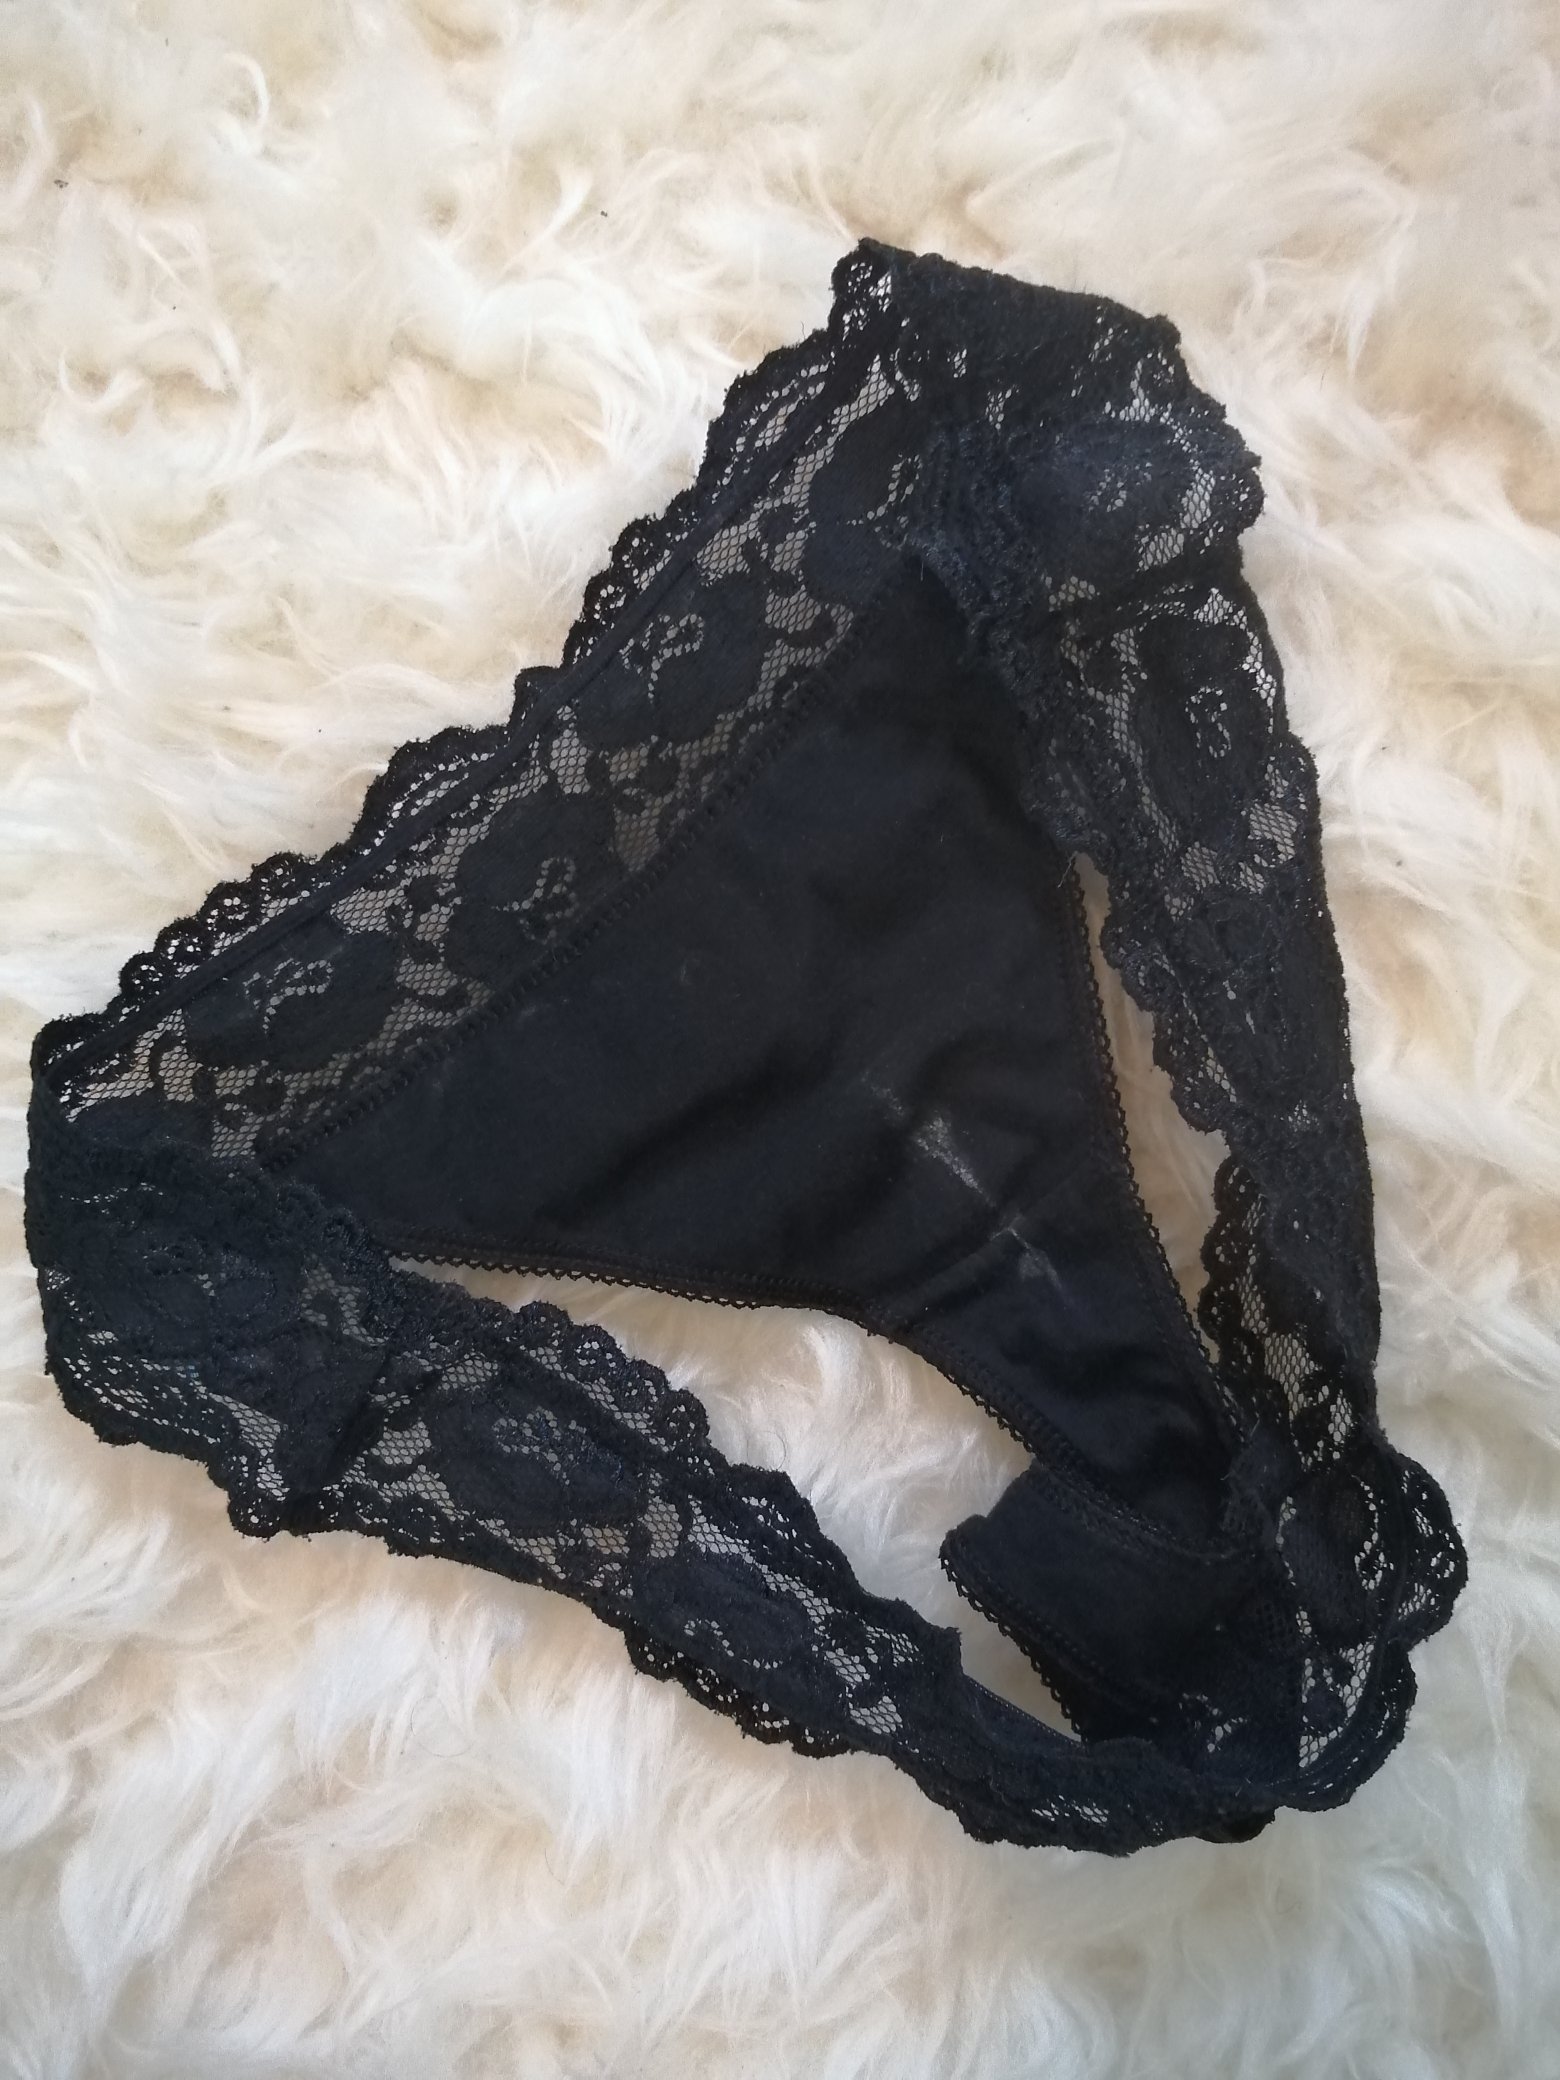 QueenoftheHF on X: Selling used panties, UK 14 Black Lace Thong 12 hours  wear £8 Dirty knickers well worn panties moist stained gusset    / X